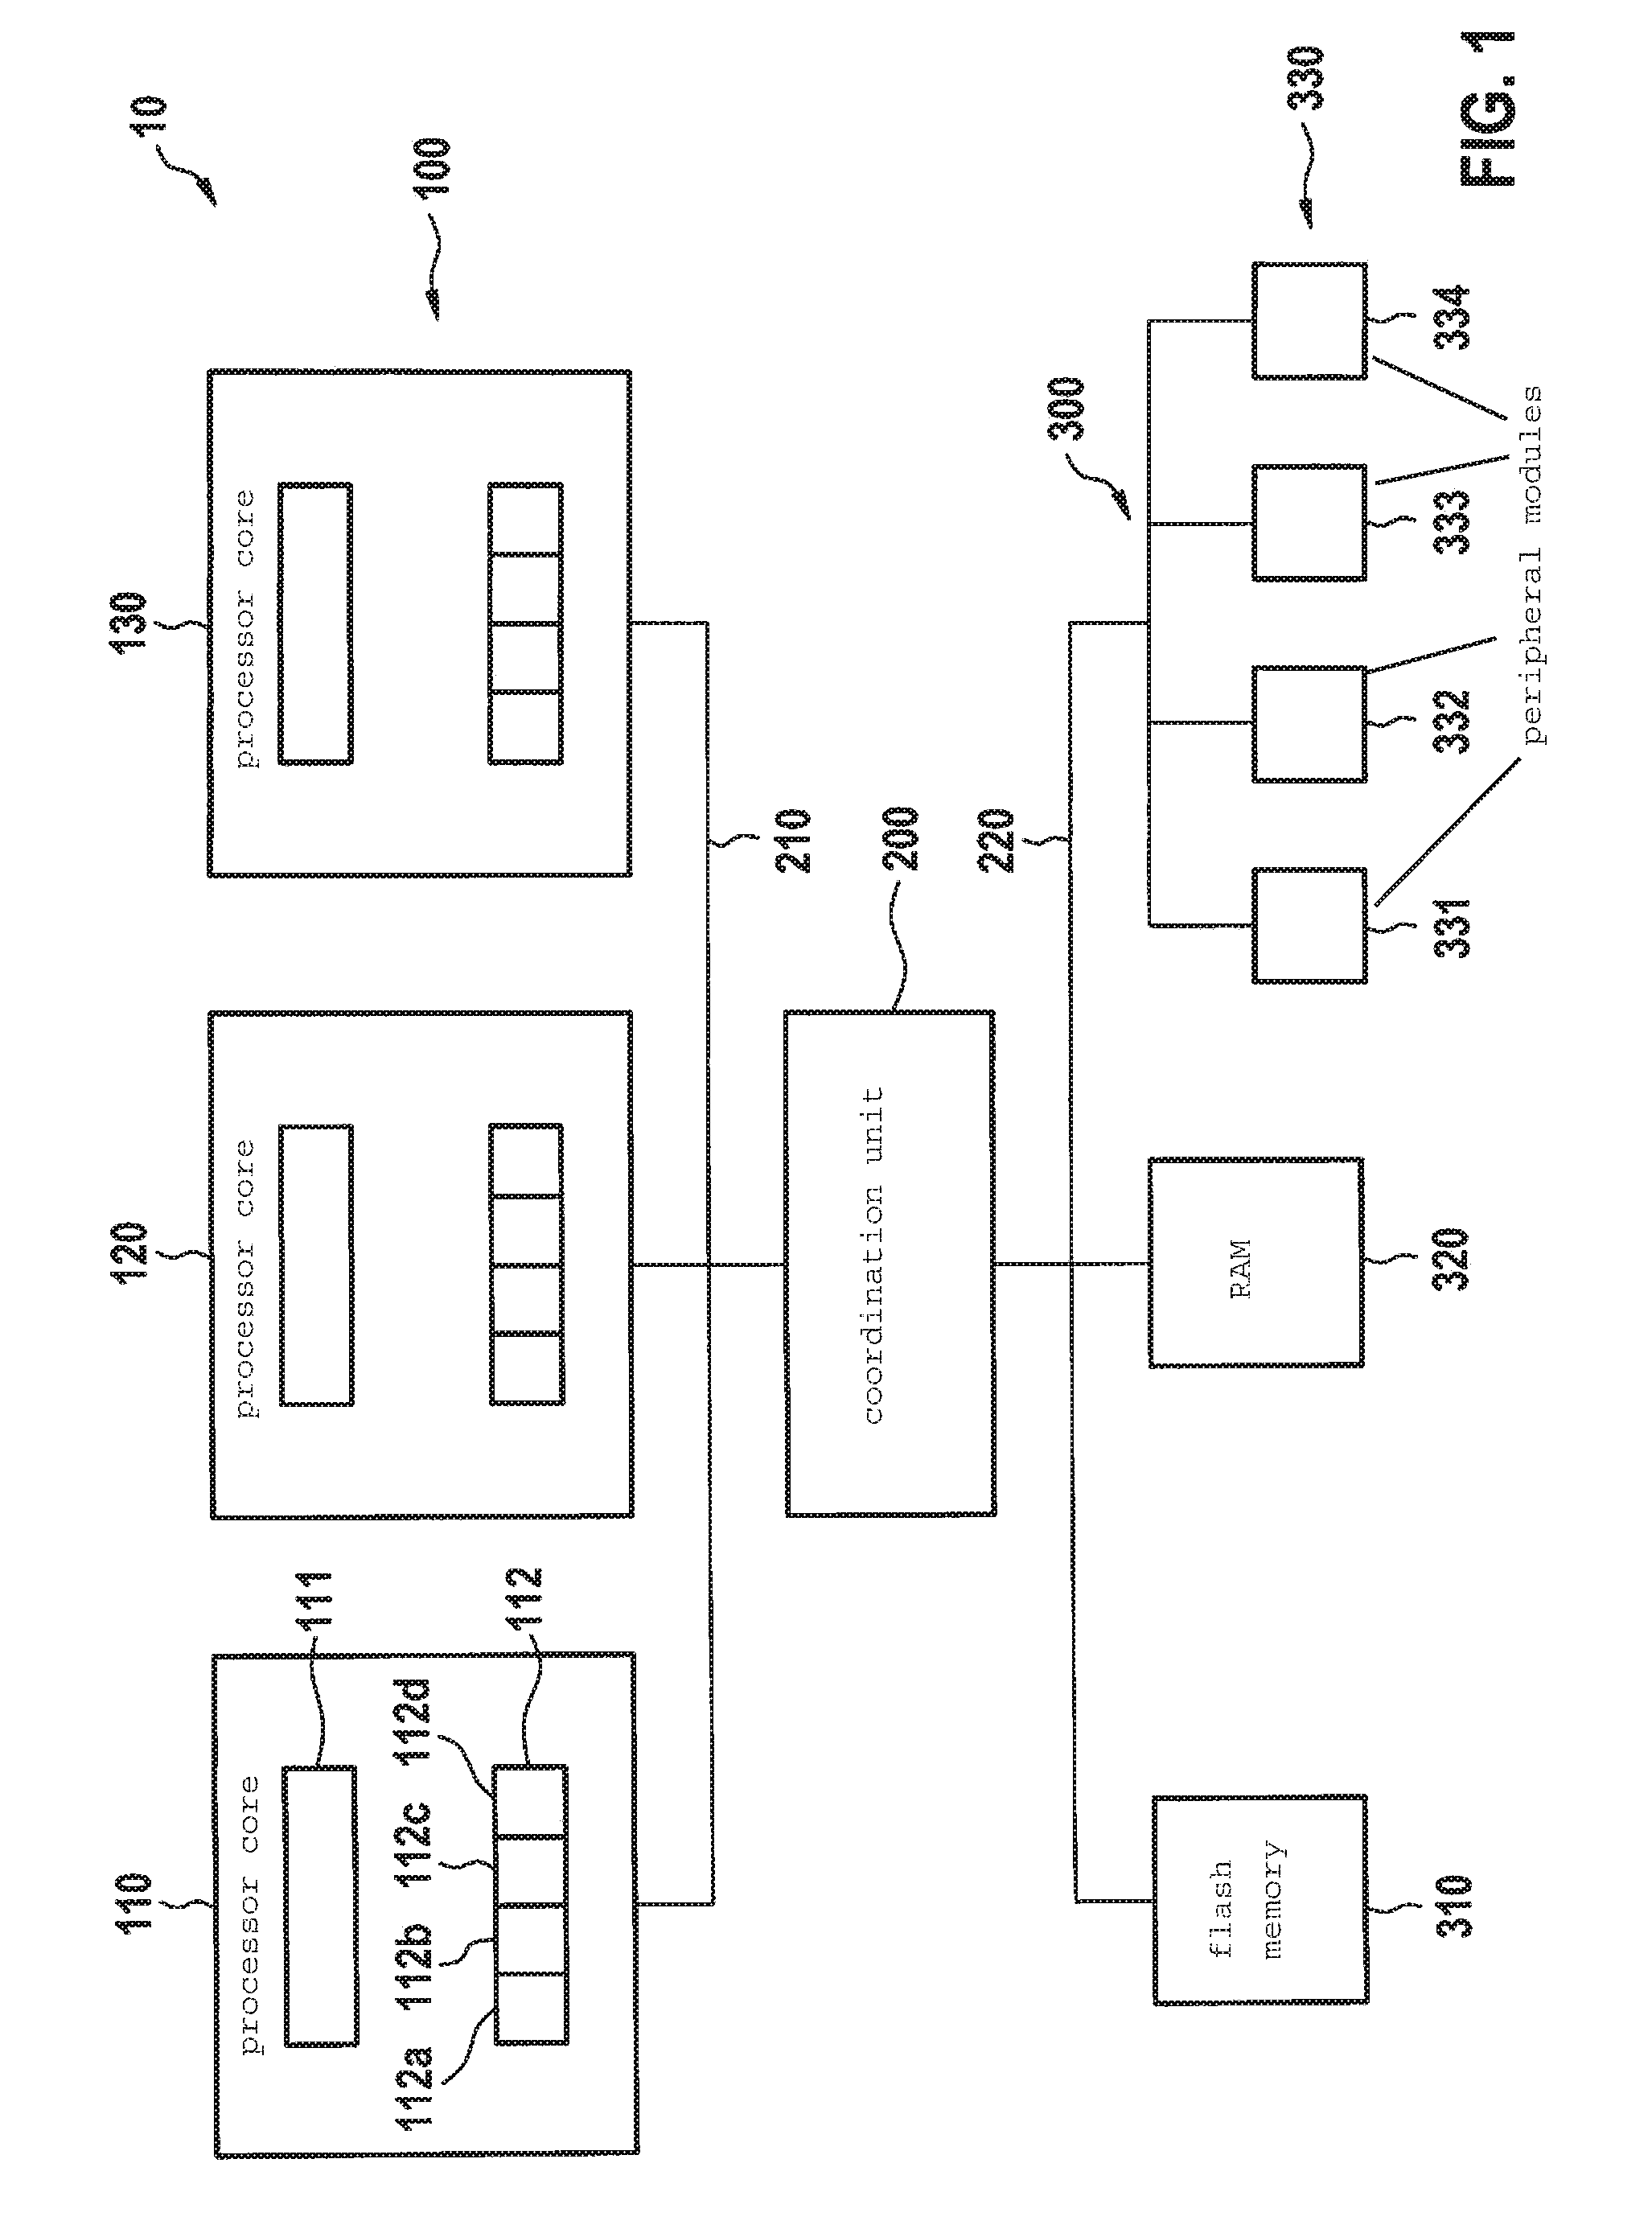 Control device for a motor vehicle